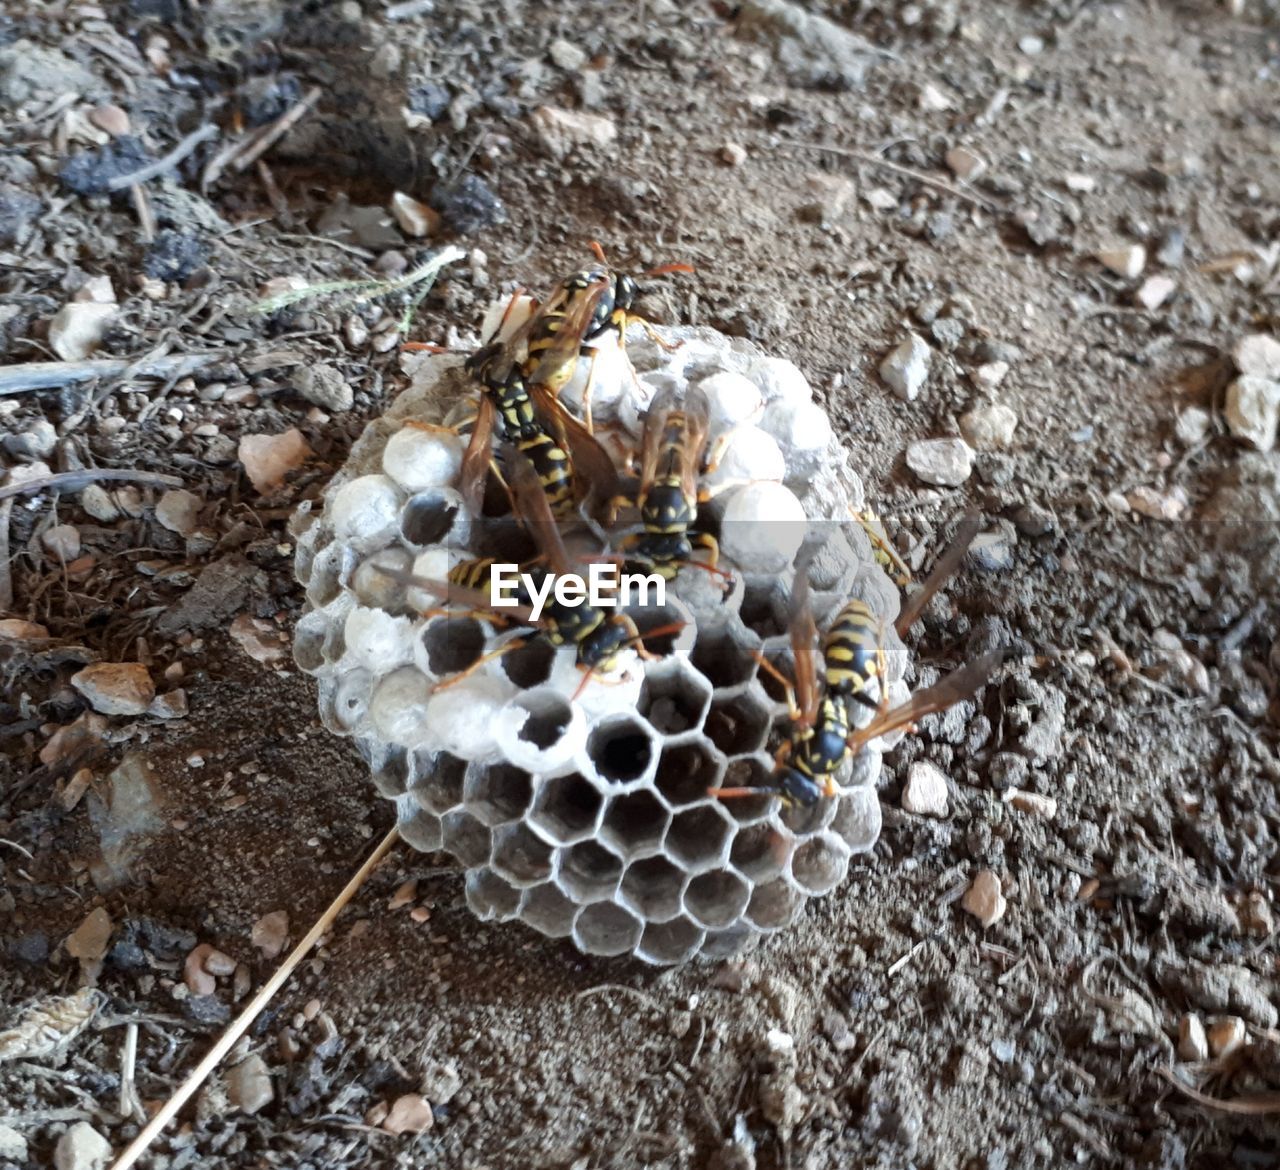 CLOSE-UP OF BEE ON NEST